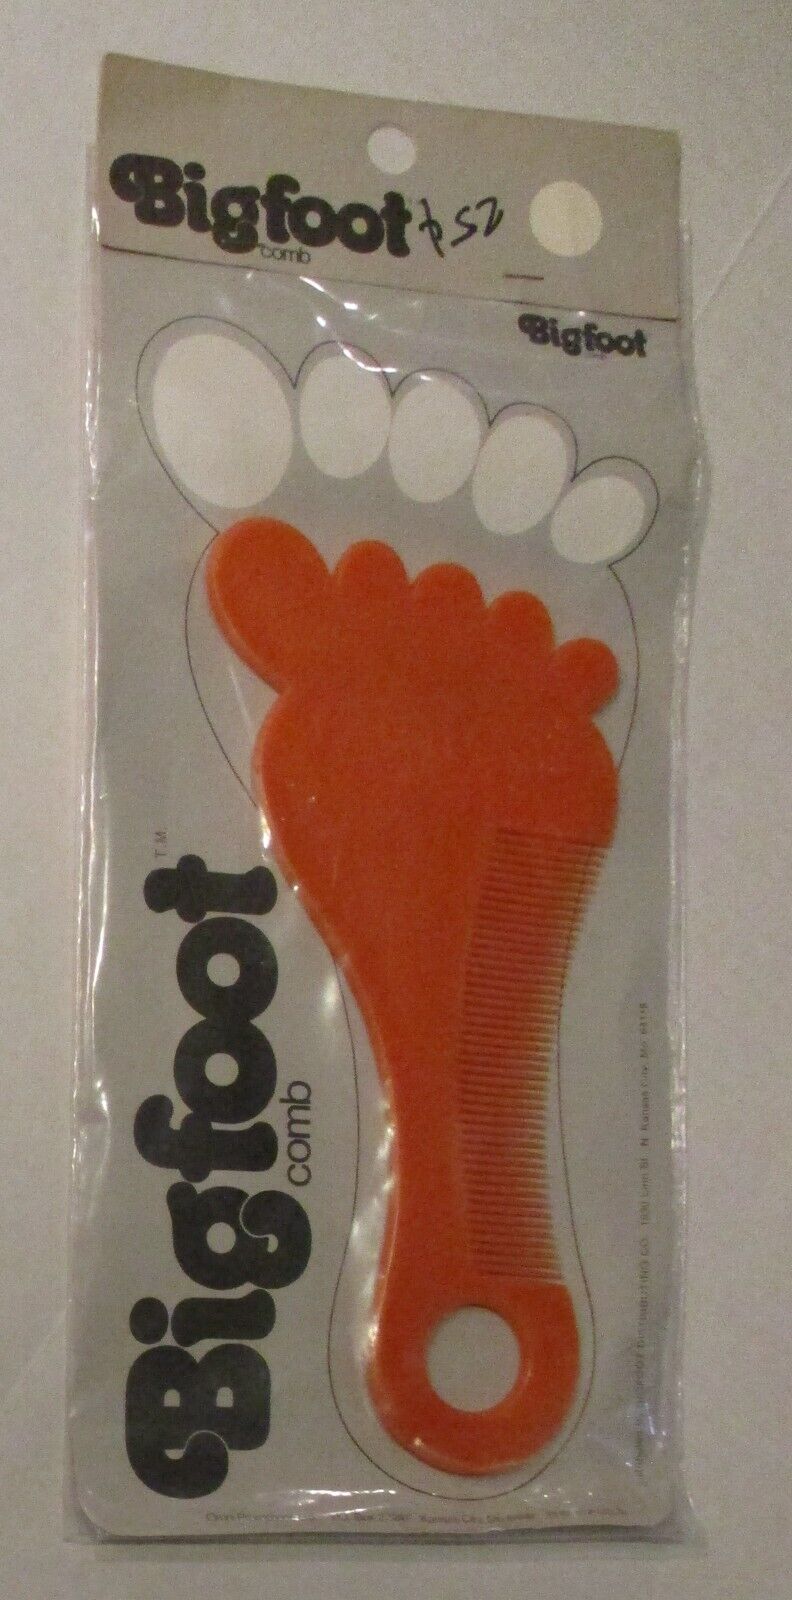 Vintage 1980\'s Bigfoot Comb Orange NEW IN PACK 9 Inch Retro Weird Collectible